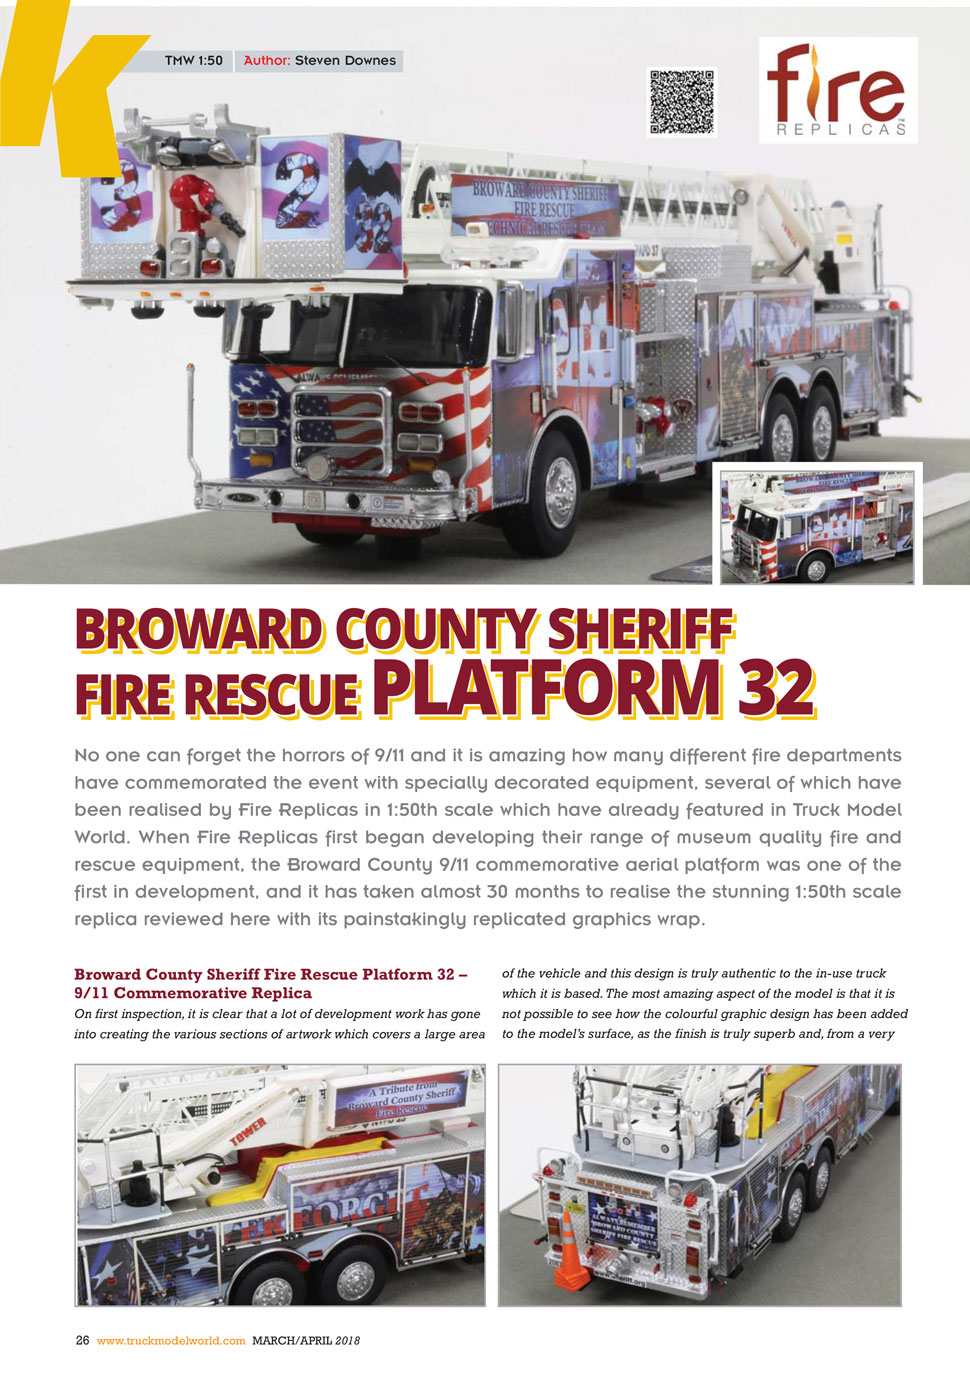 Click to learn more about Broward County's P-32!